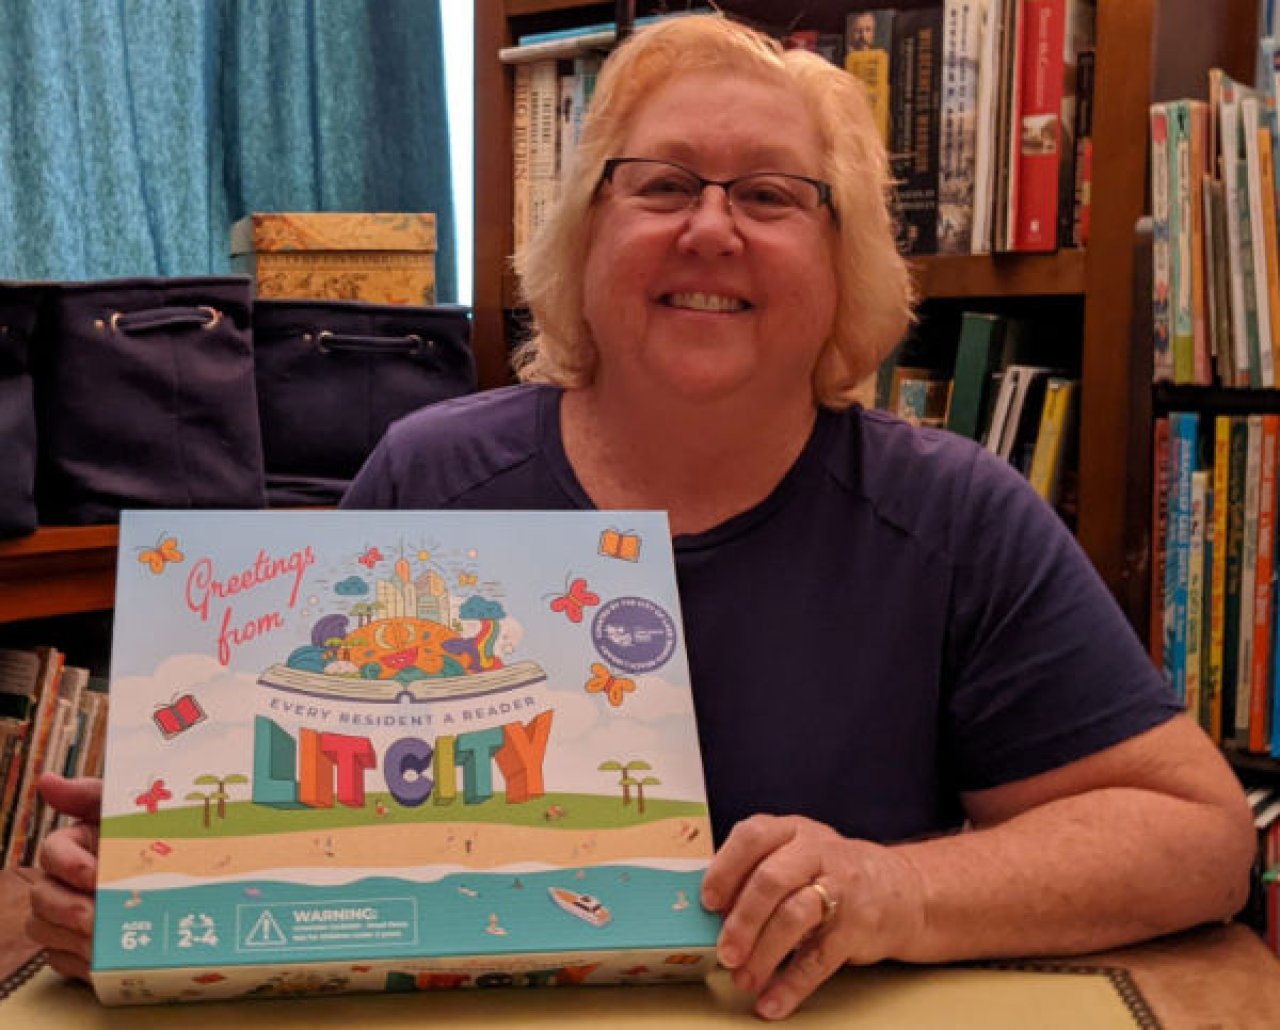 Cindy Ansell with Lit City Game box.